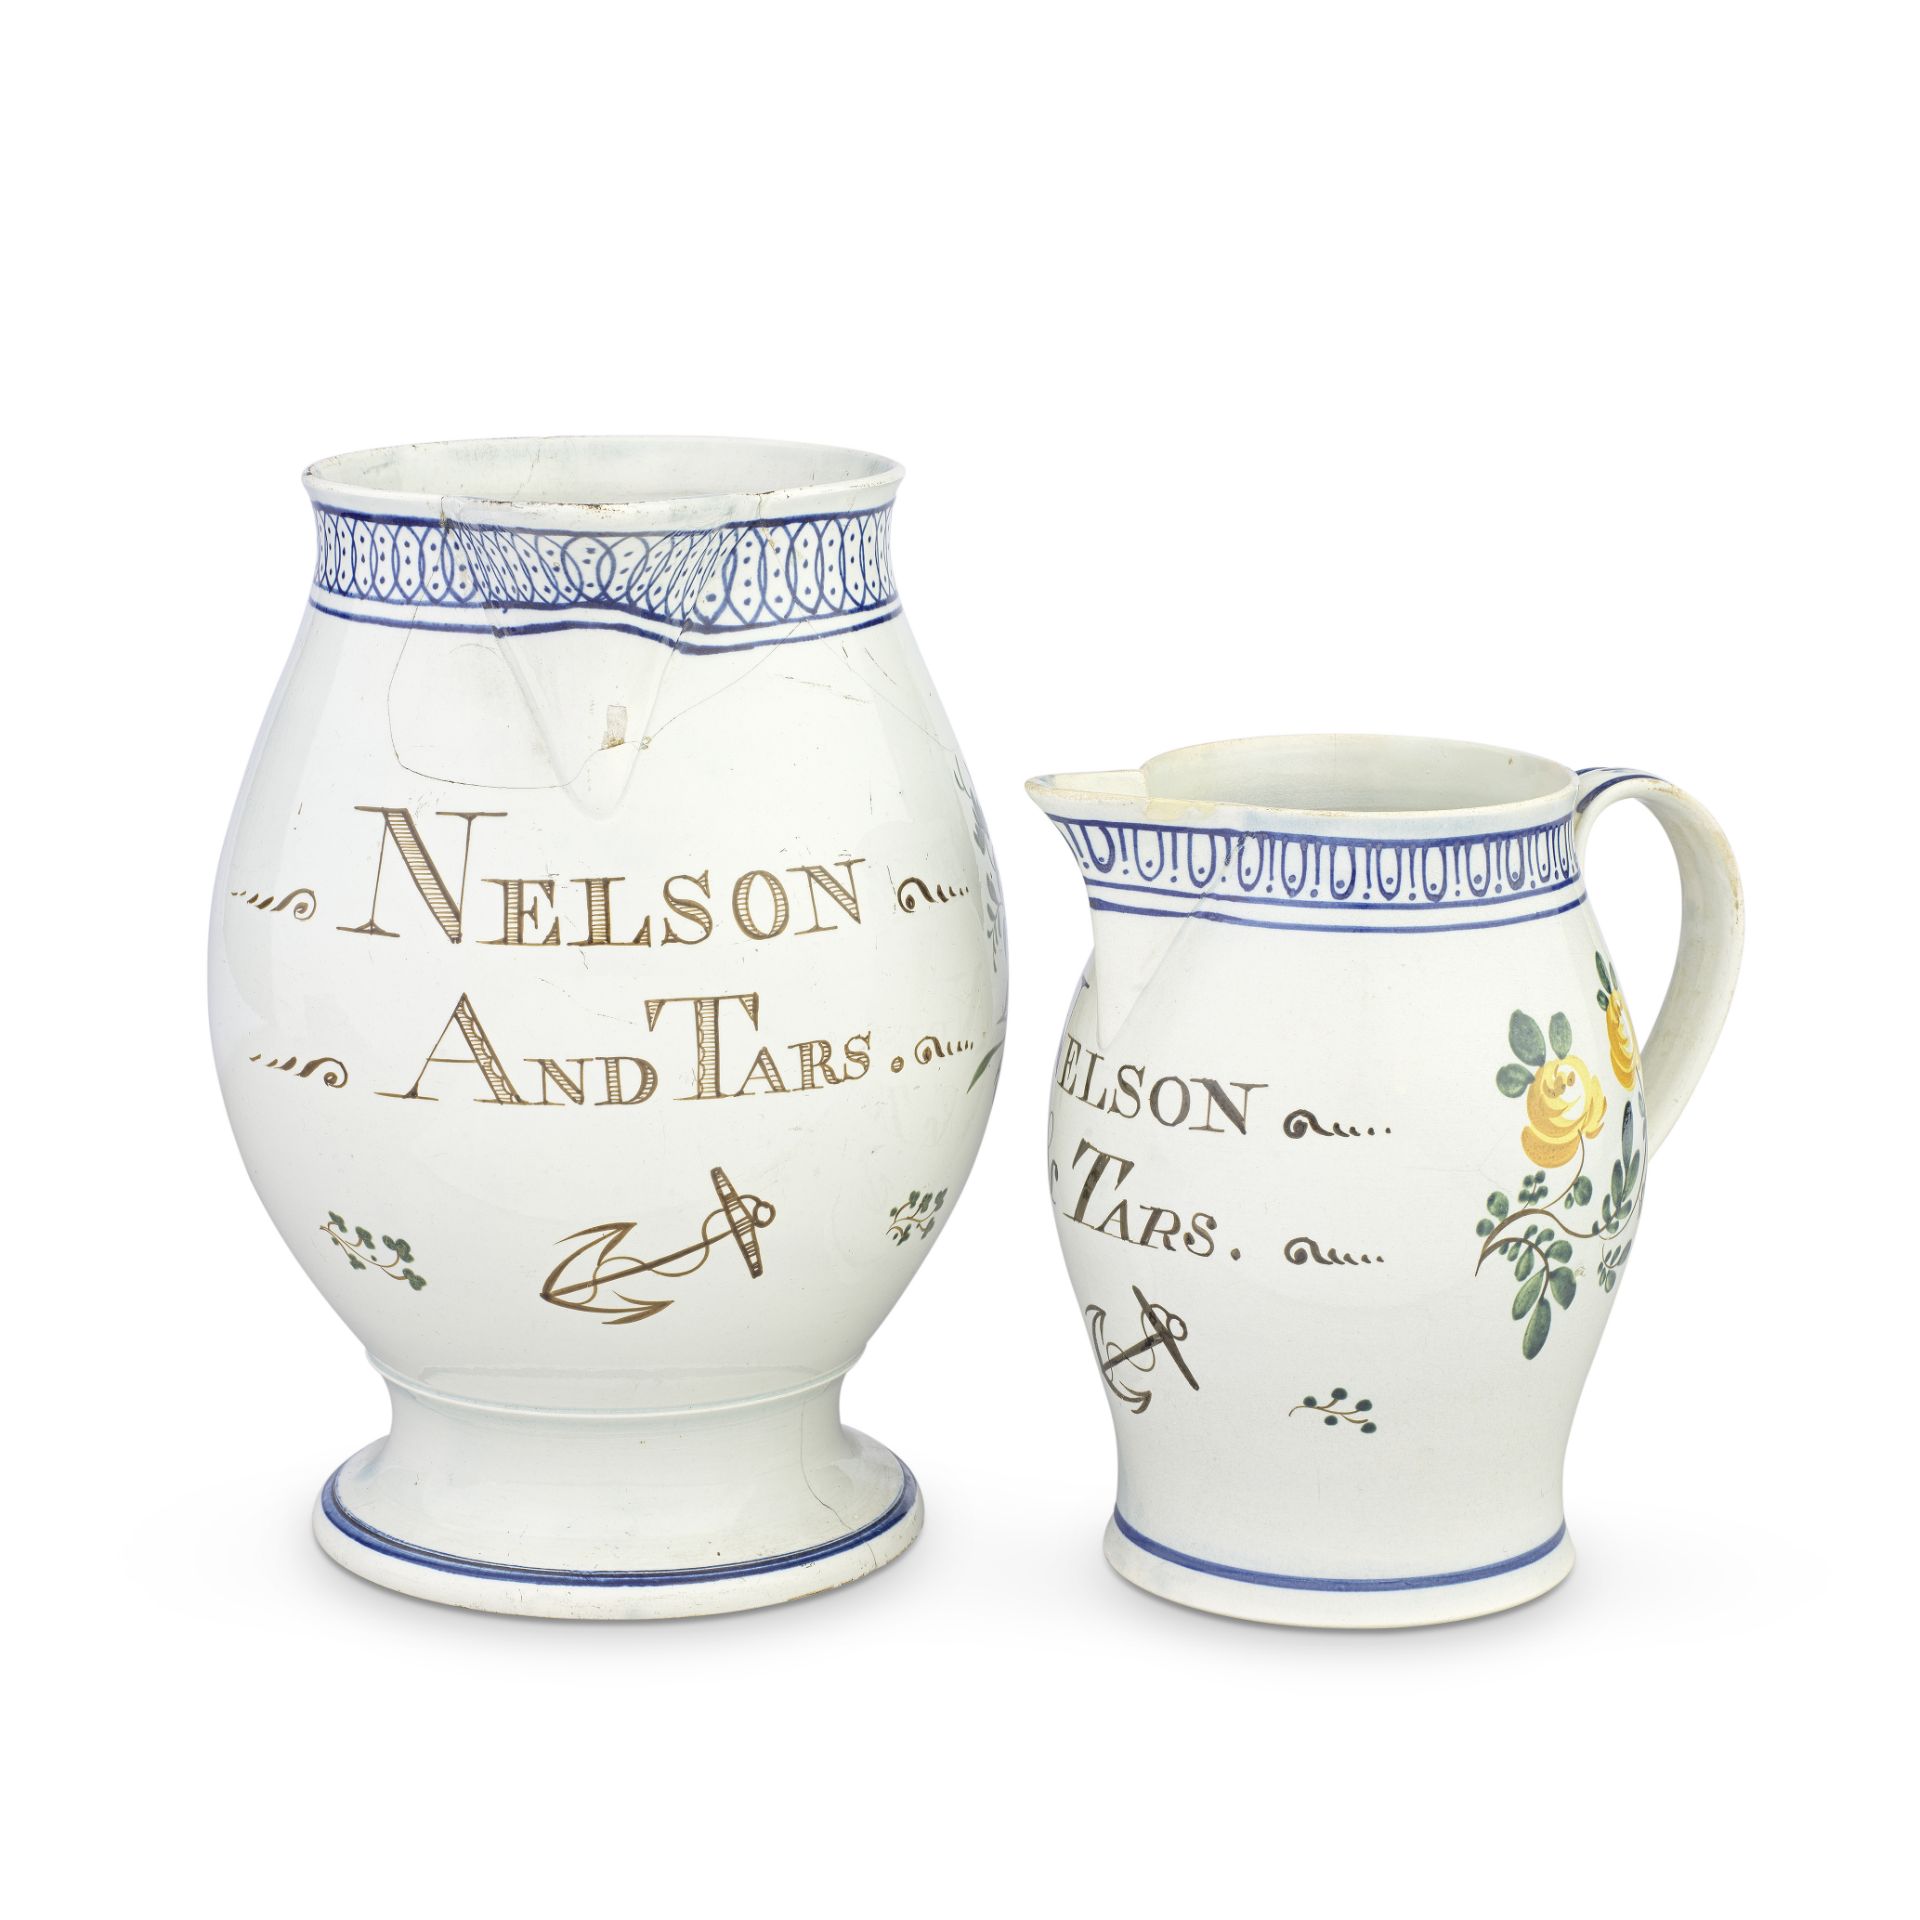 'Nelson and Tars': Two pearlware jugs, circa 1800